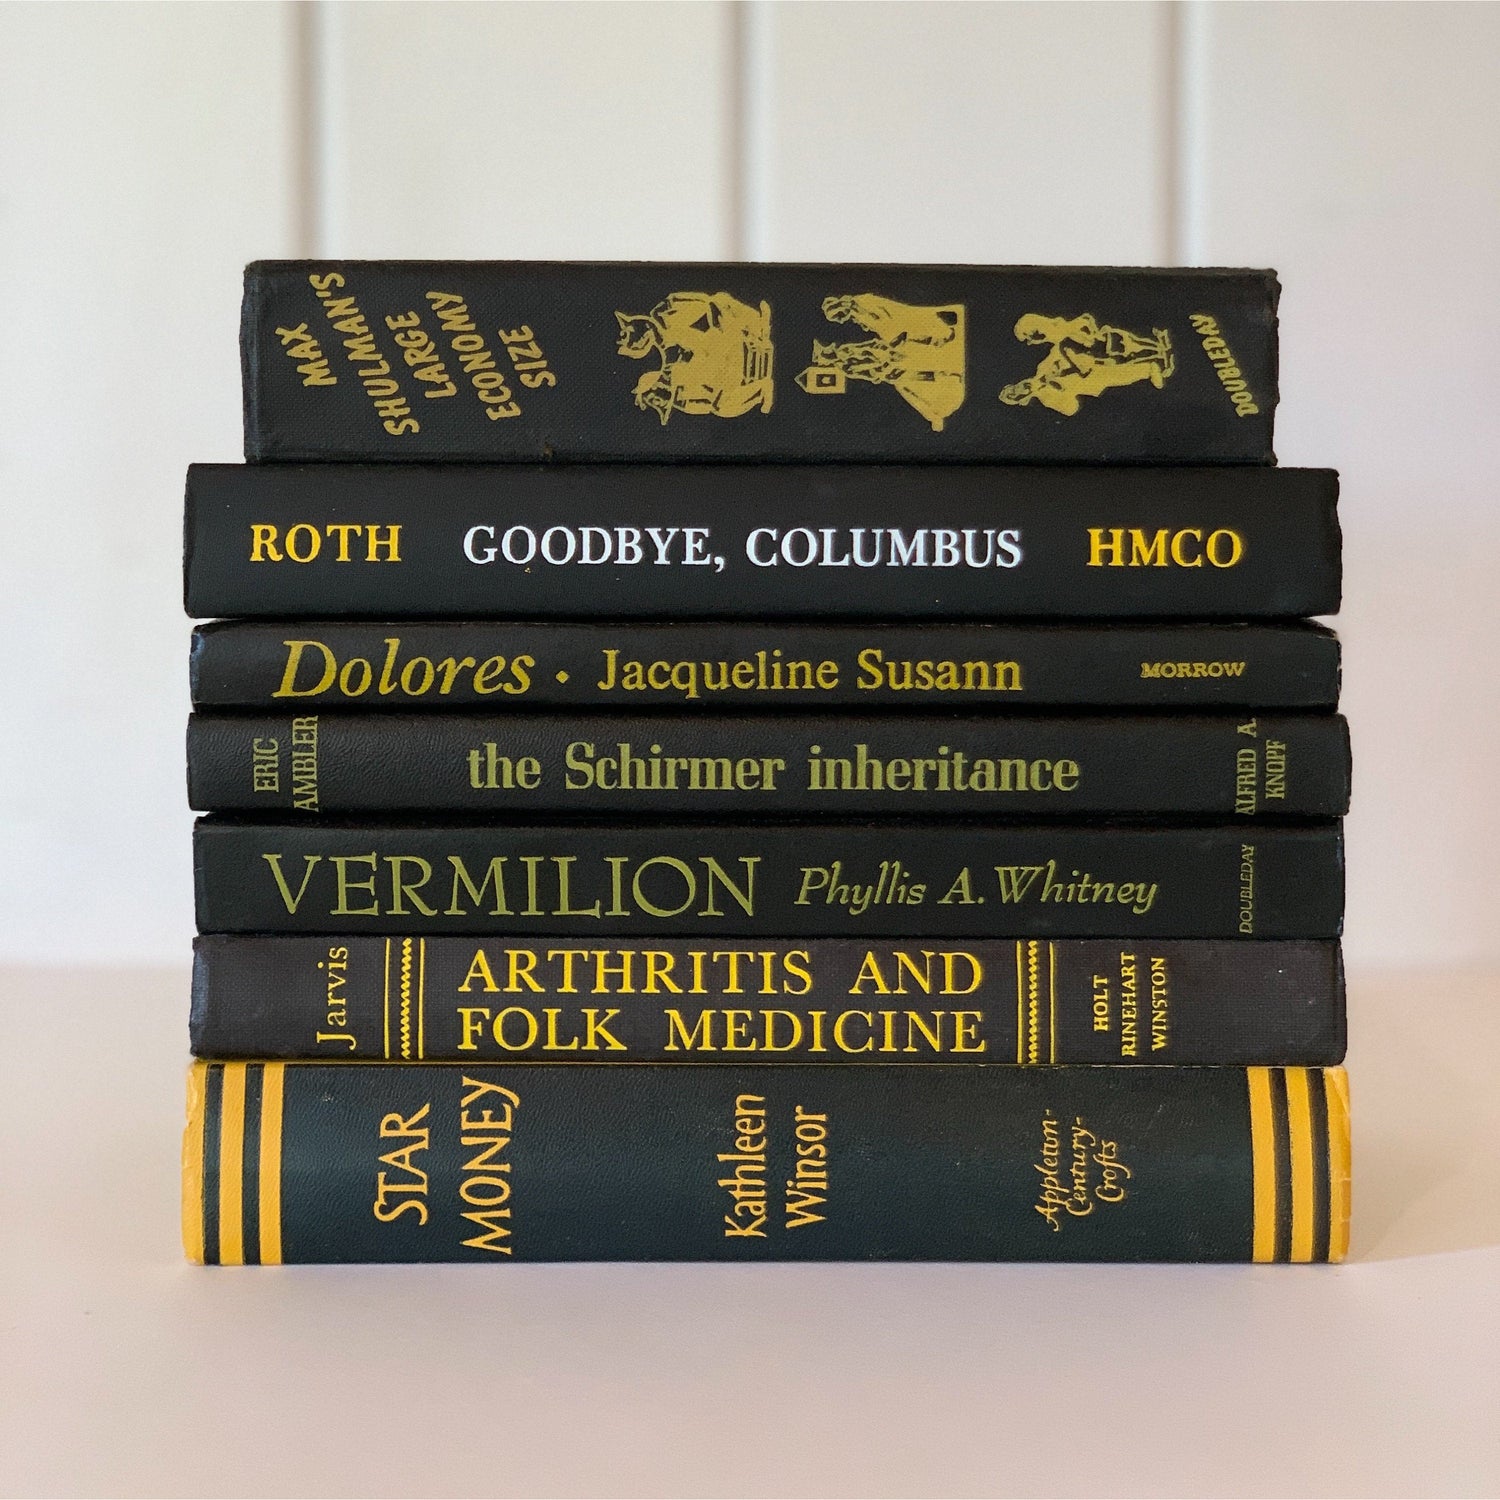 Large Vintage Black Books With Colorful Lettering for Decor